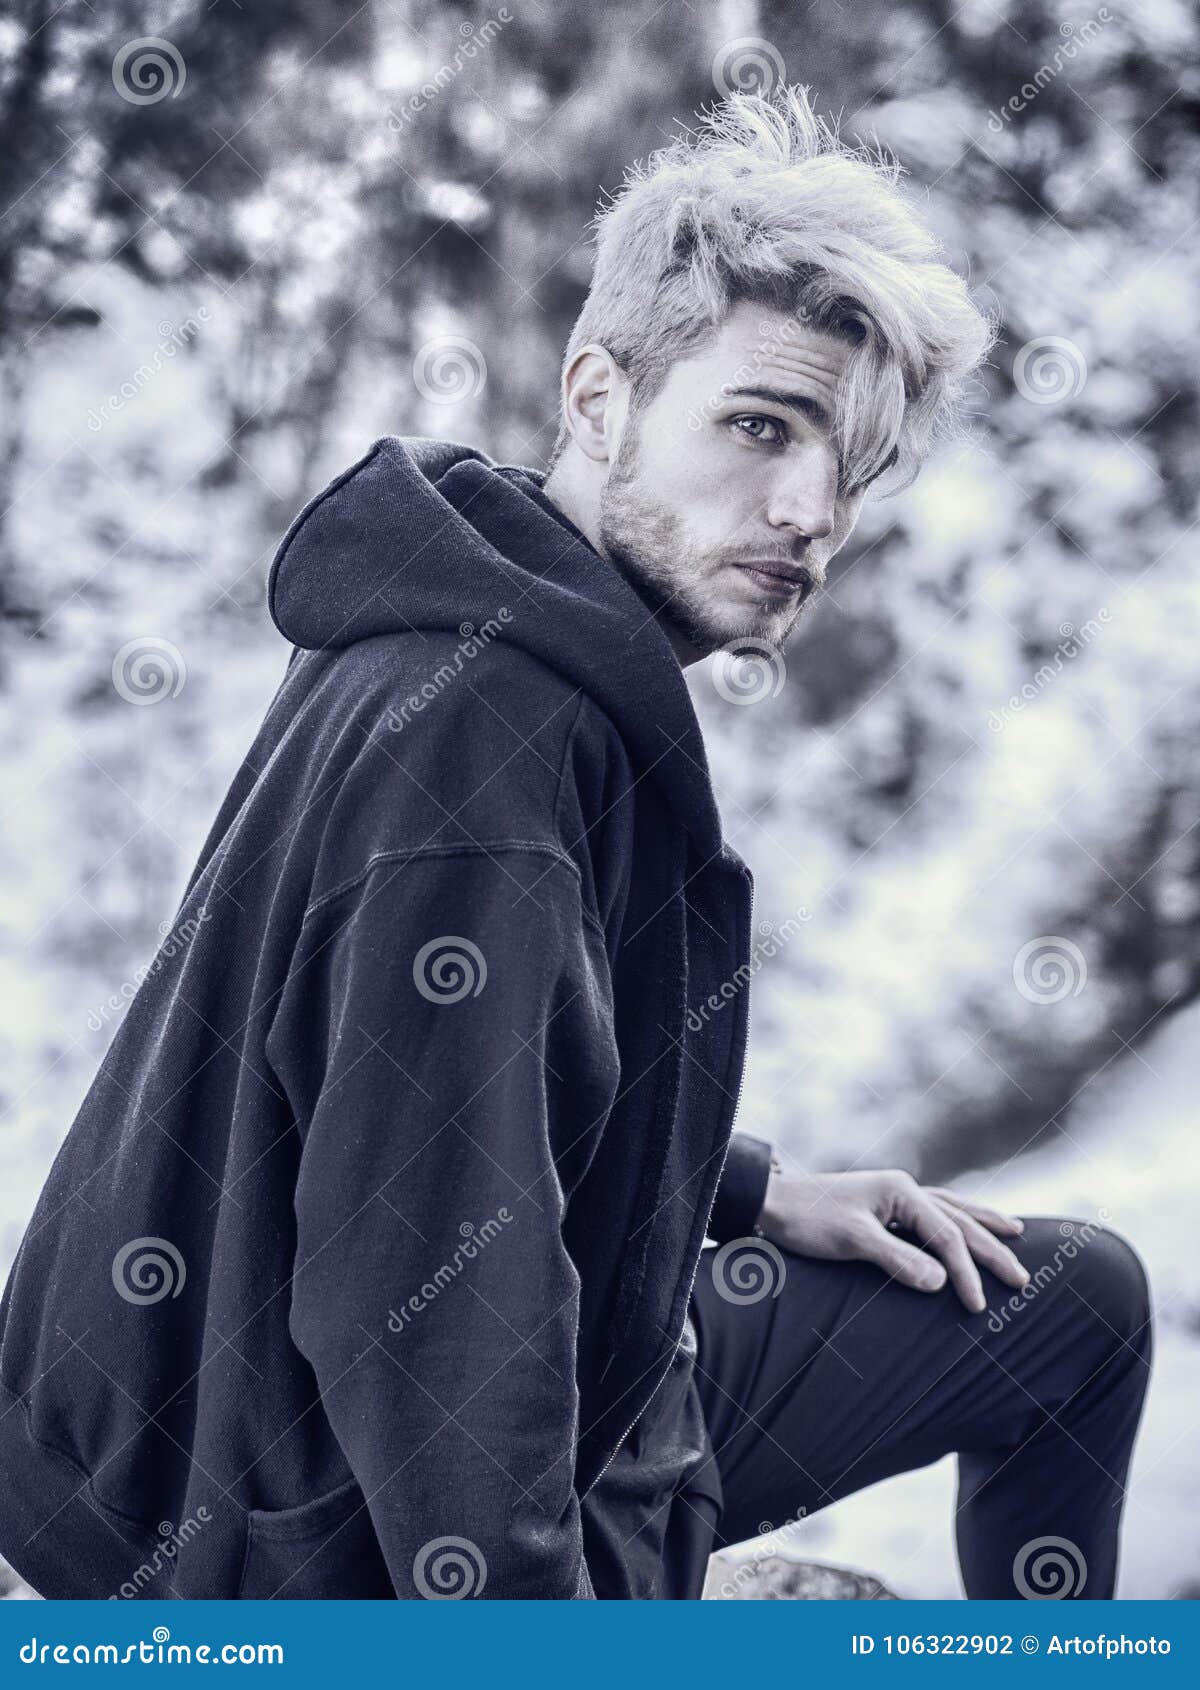 portrait young man hoodie posing outdoor winter setting snow all around looking camera handsome man snow 106322902